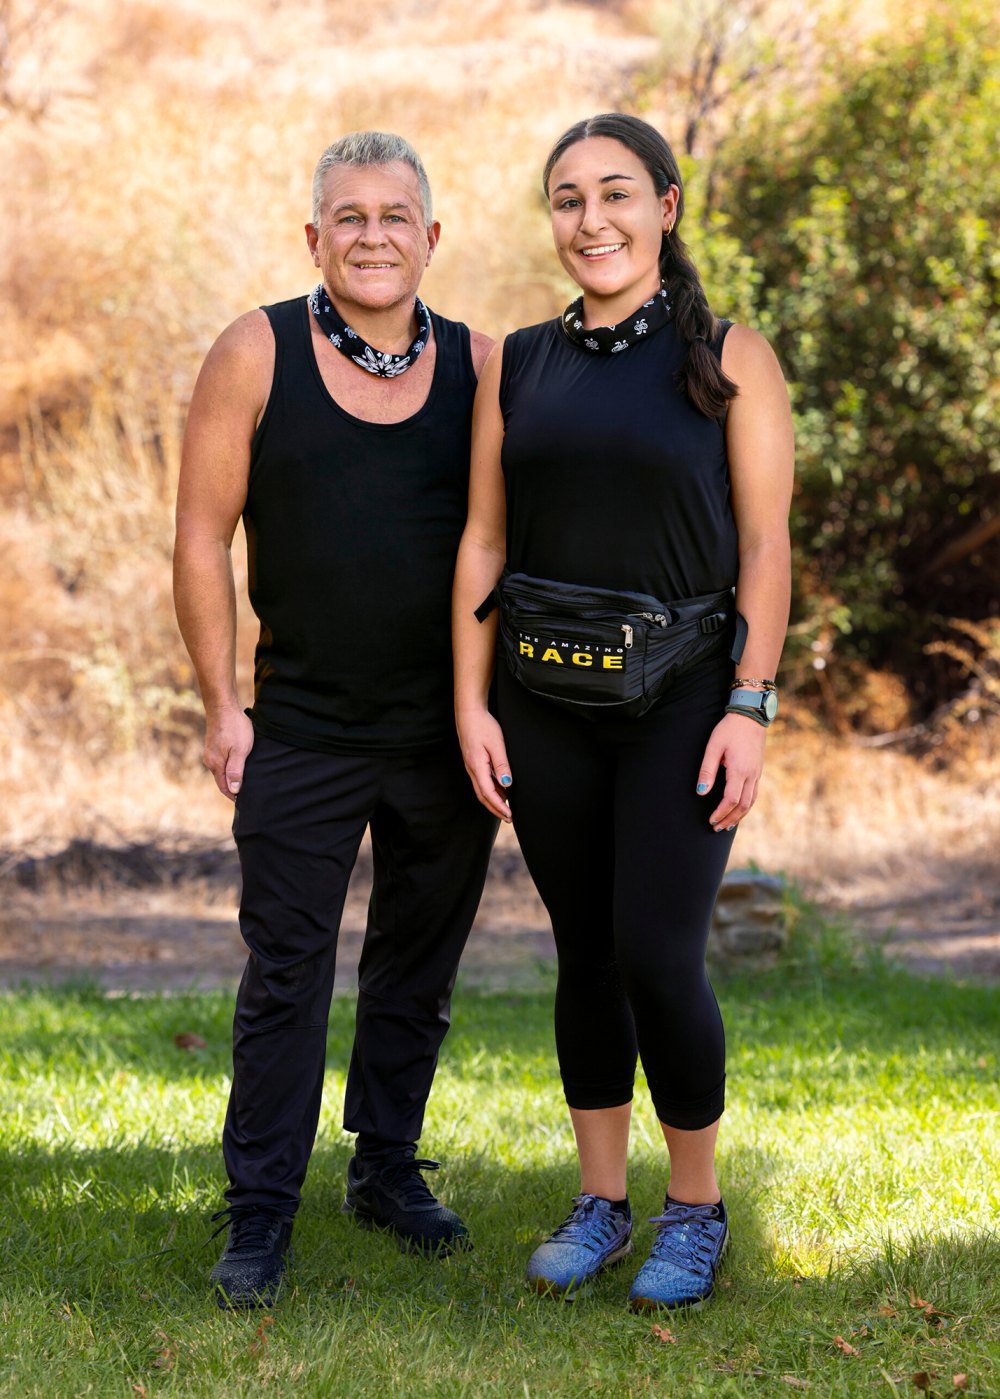 The Amazing Race’s Chris and Mary Explain Why Chris Really Needed a Rest: ‘My Jaw Dropped’